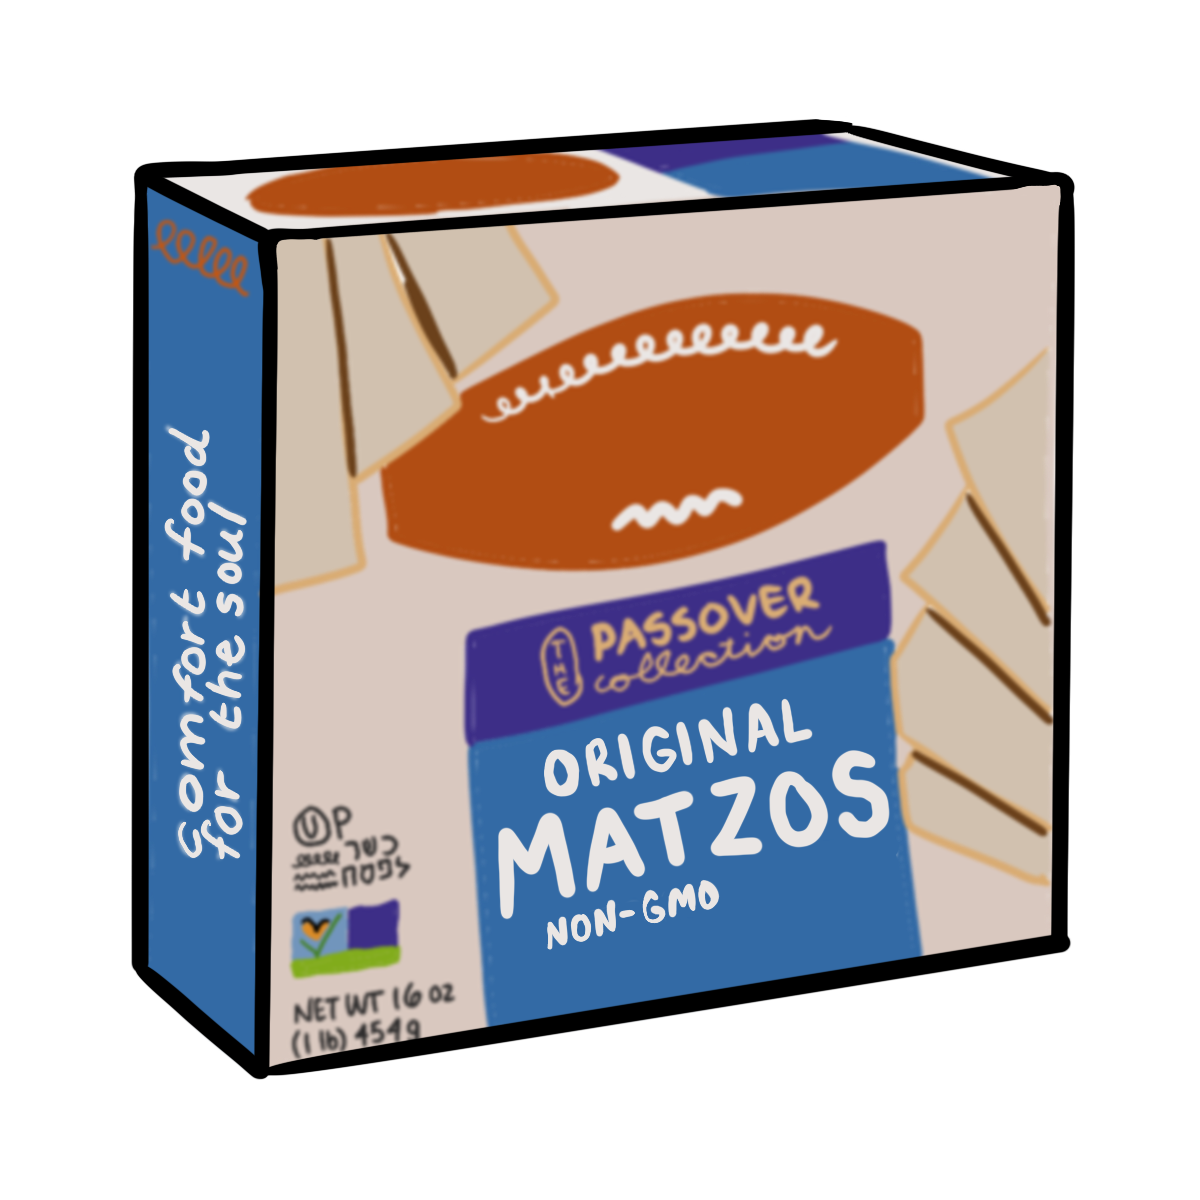  A sand colored box with a blue side that says comfort food for the soul. the front has an orange oval and square blue label that says The Passover collection Original Matzos non GMO. Corner has some food label info. The front has tan rectangles fanned out in the corners.